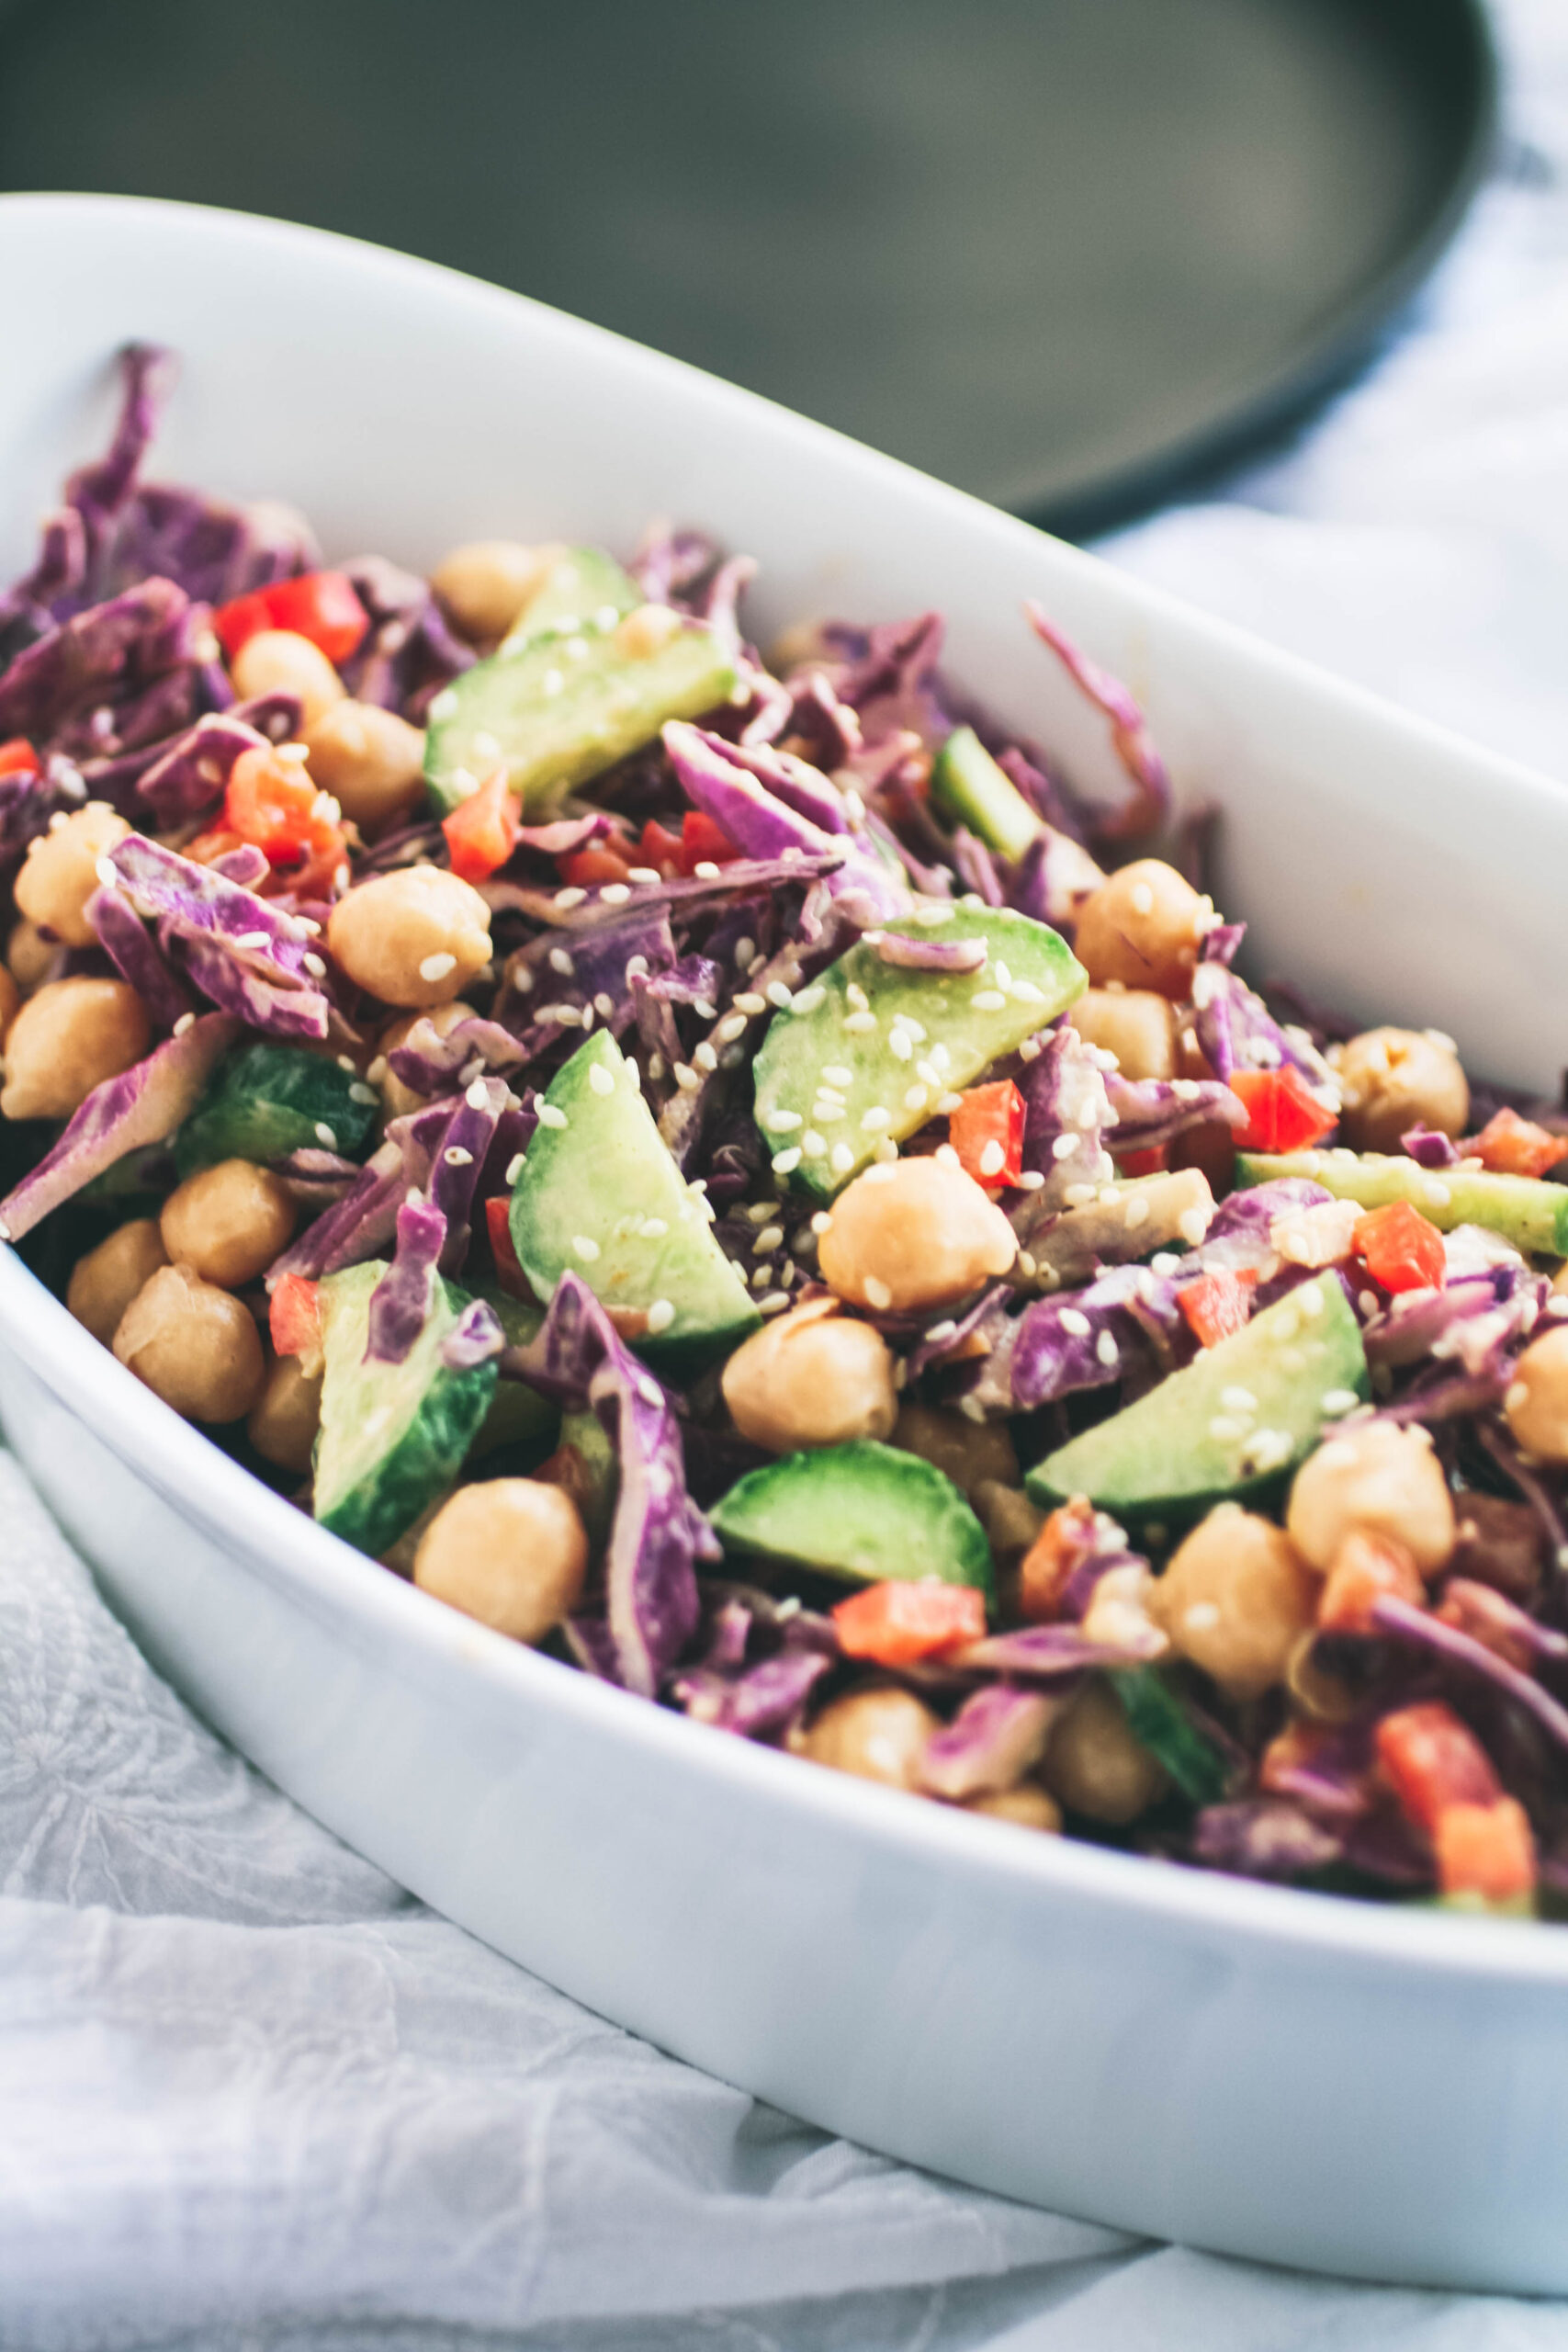 Cabbage and Chickpea Salad in Thai-Style Peanut Dressing is a flavorful, colorful, and crunchy salad that's hearty and so tasty!